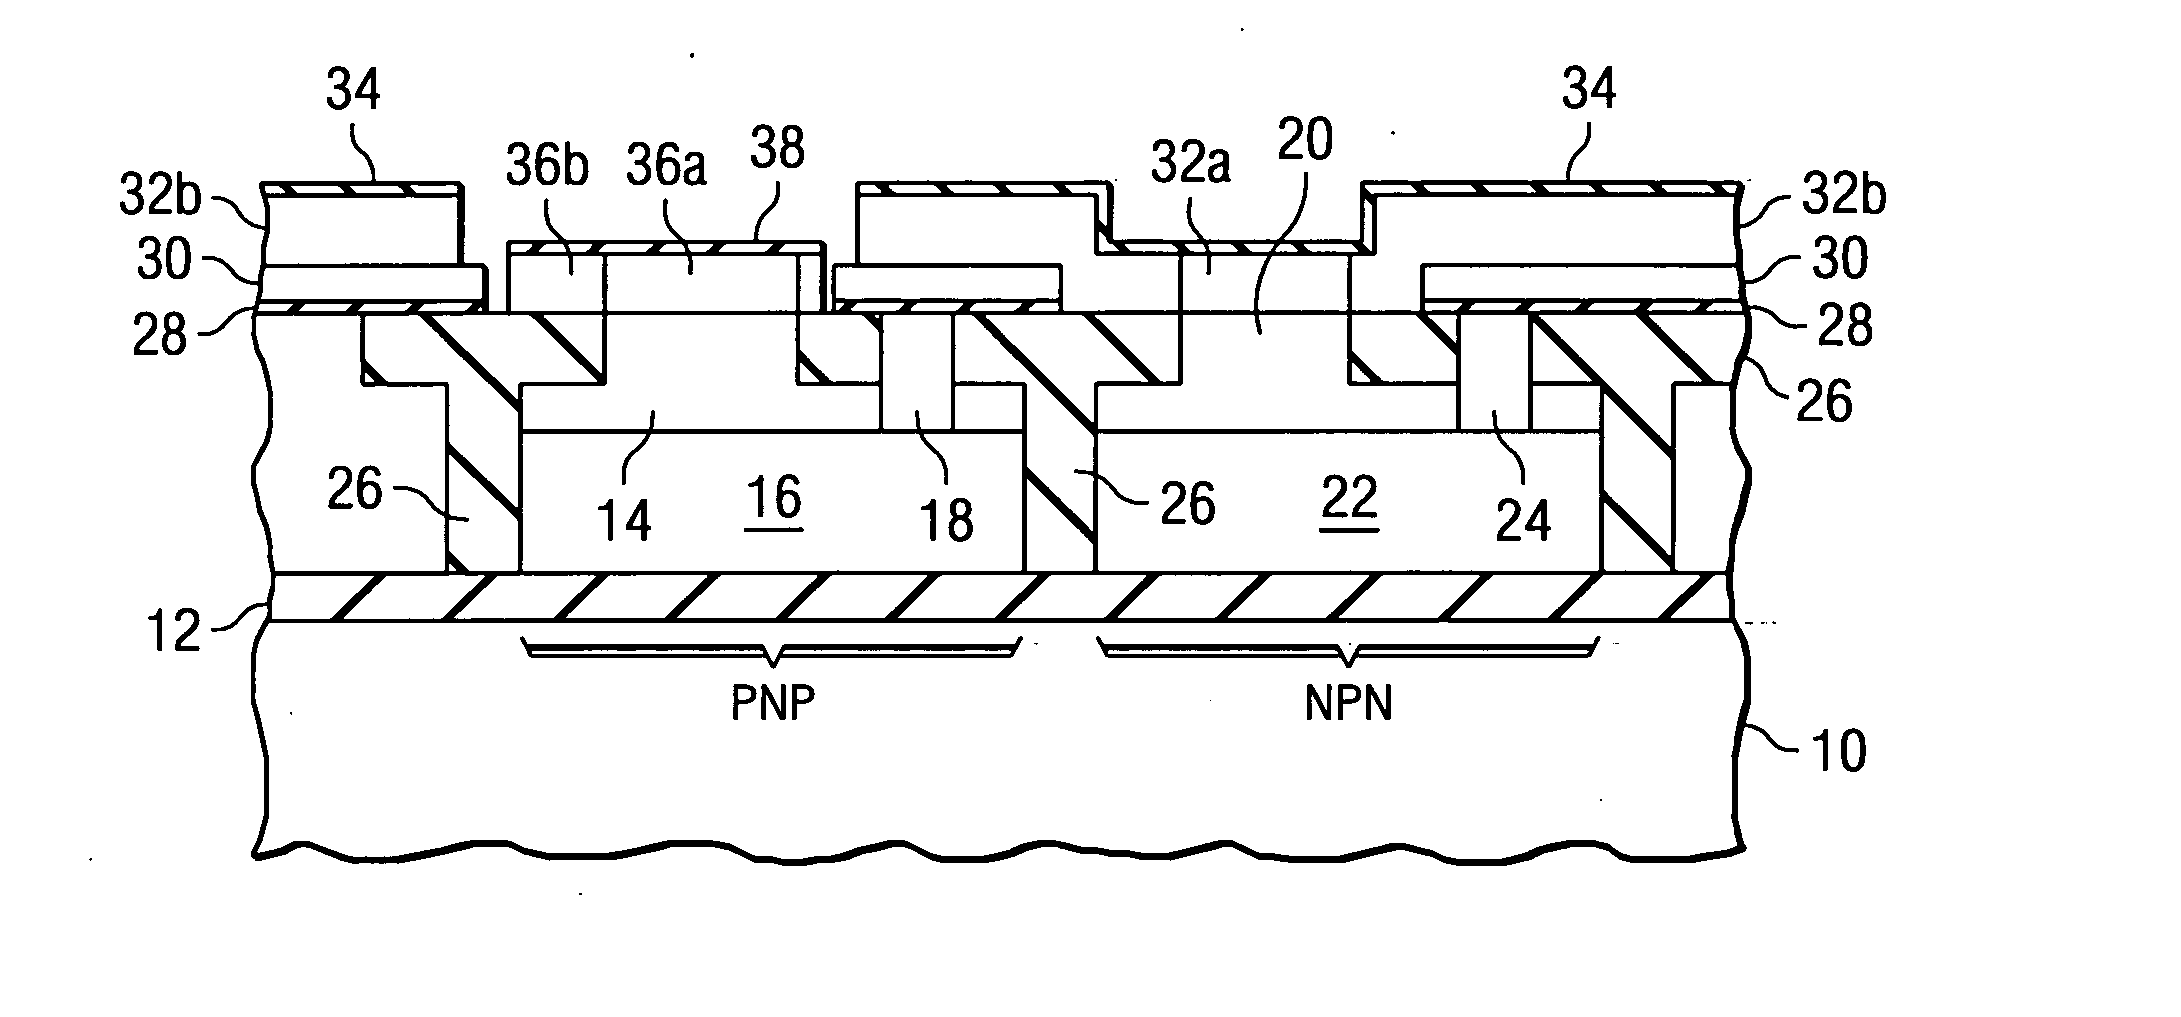 Method of fabricating complementary bipolar transistors with SiGe base regions